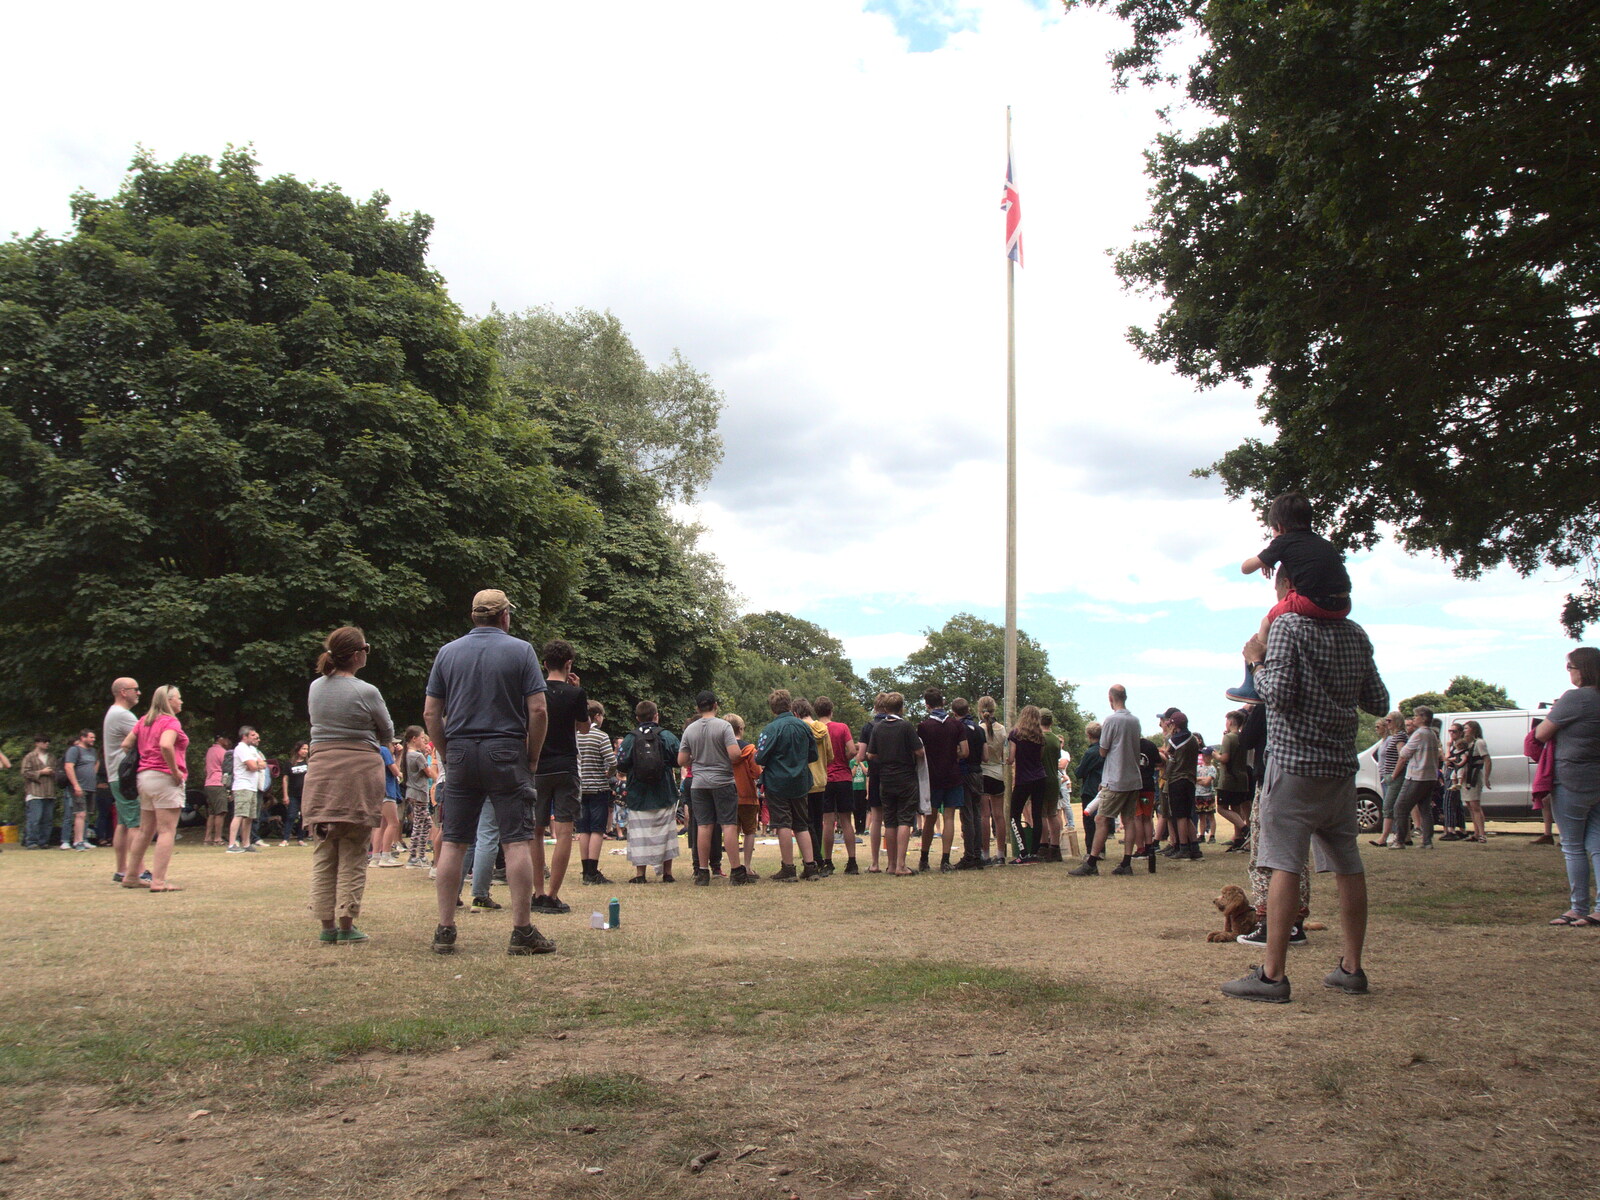 There's a short flag-lowering ceremony from A Fire, a Fête, and a Scout Camp, Hallowtree, Suffolk - 30th June 2022